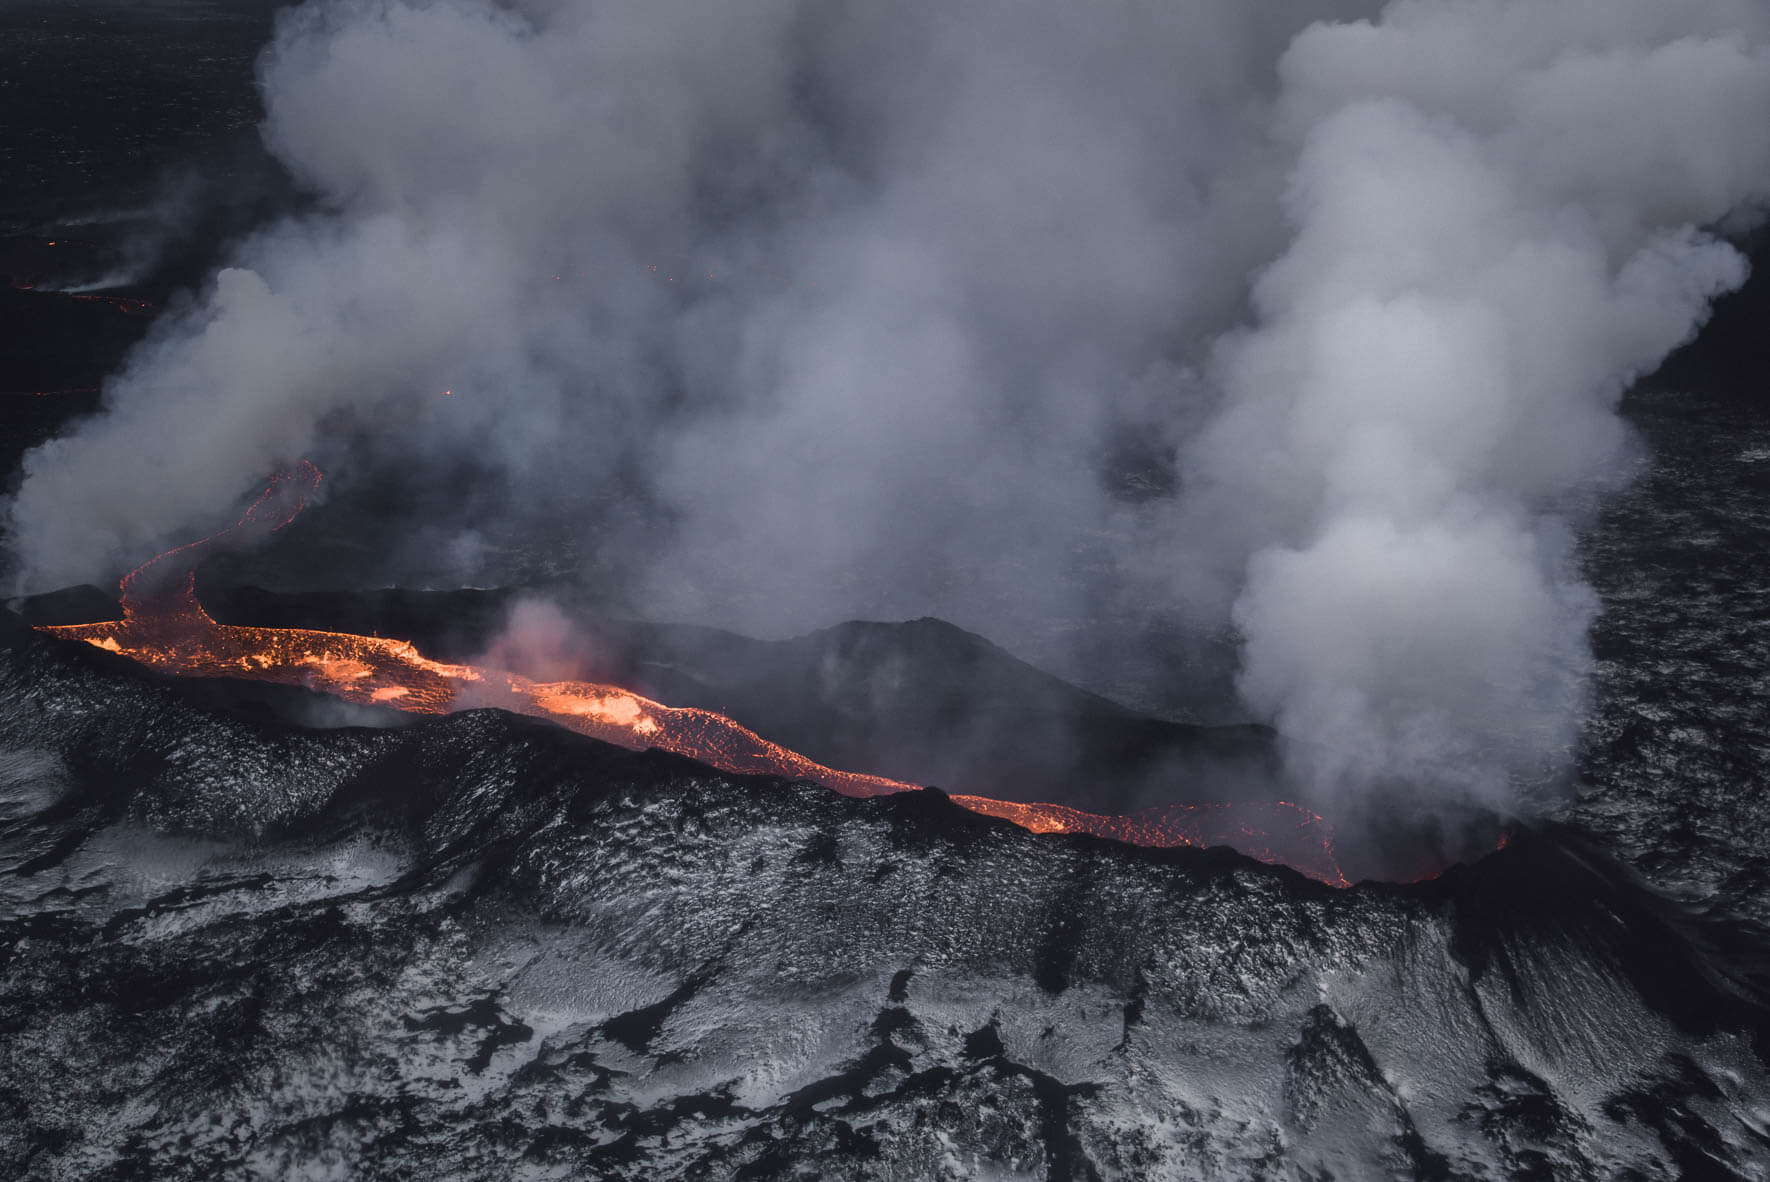 The Holuhraun lava field in Iceland in January 2015